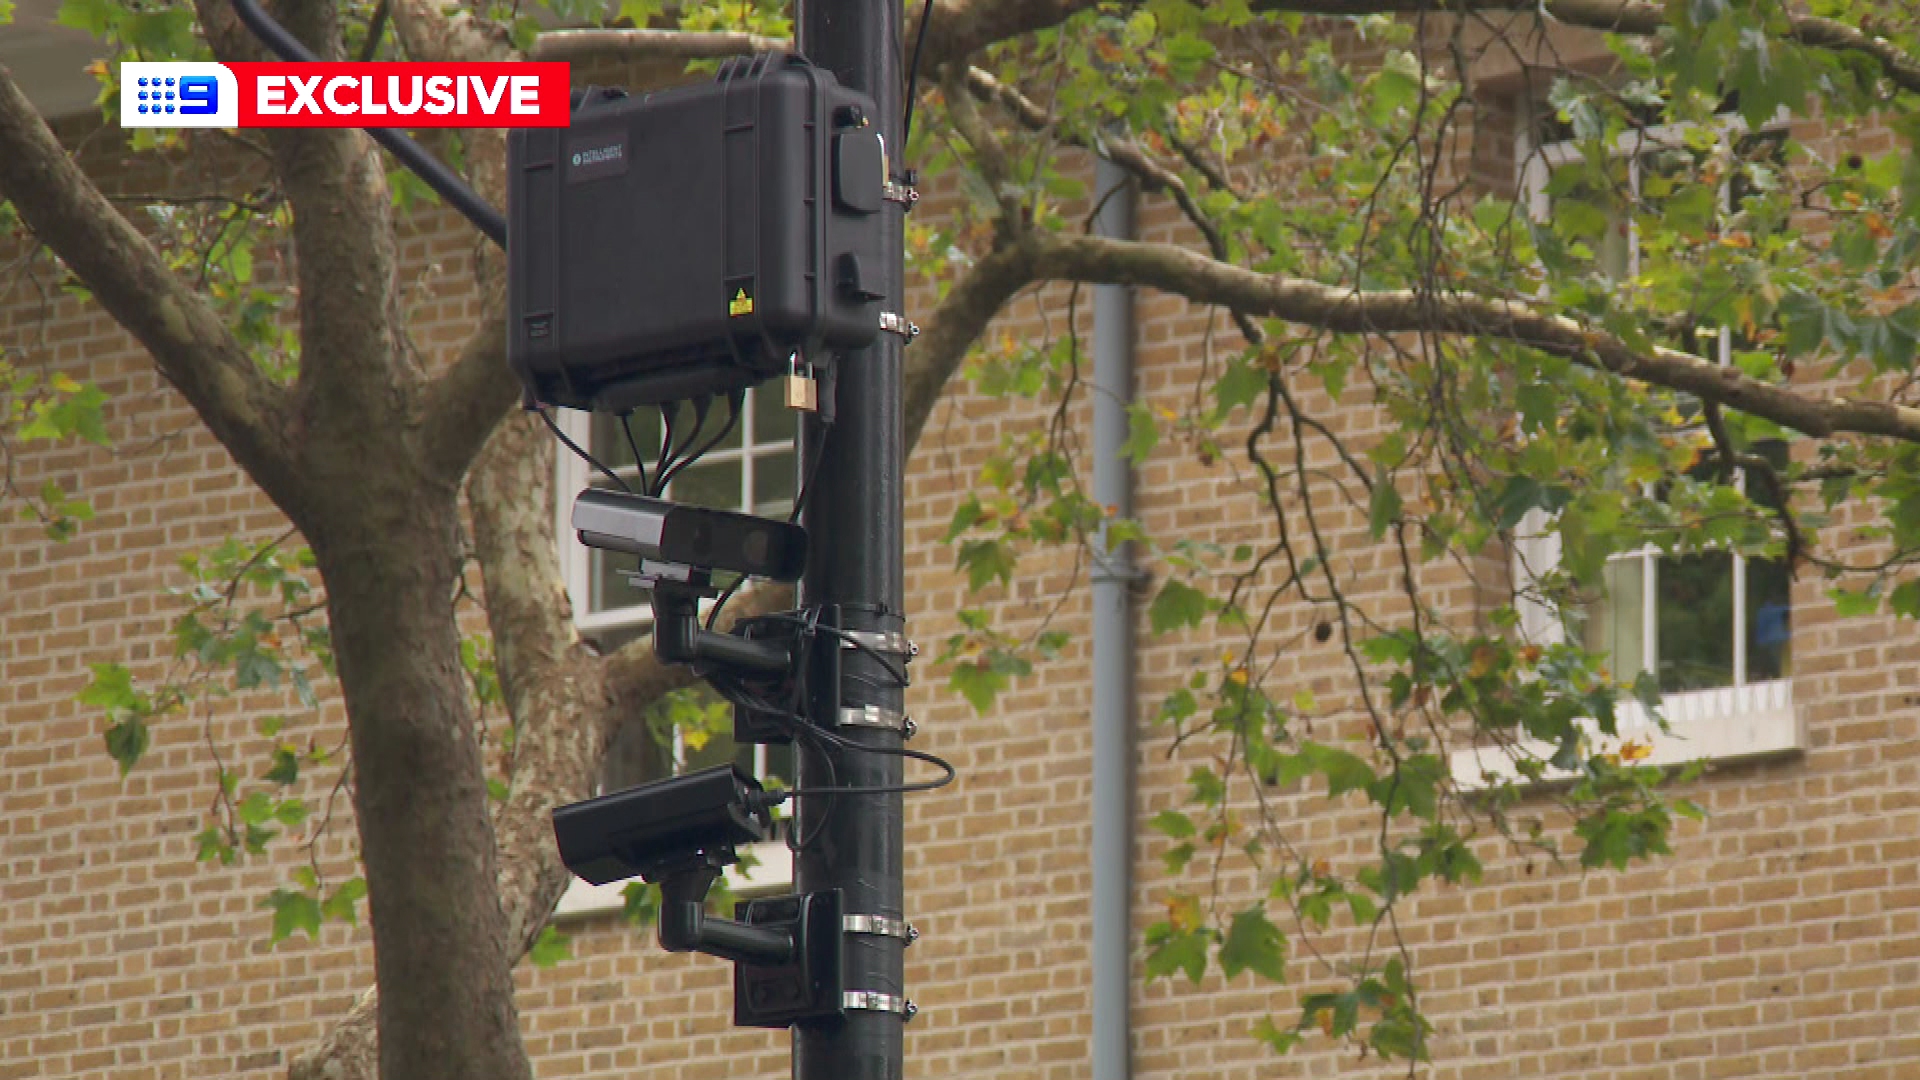 The City of Bayside is pushing to use new noise activated cameras to target reckless drivers.